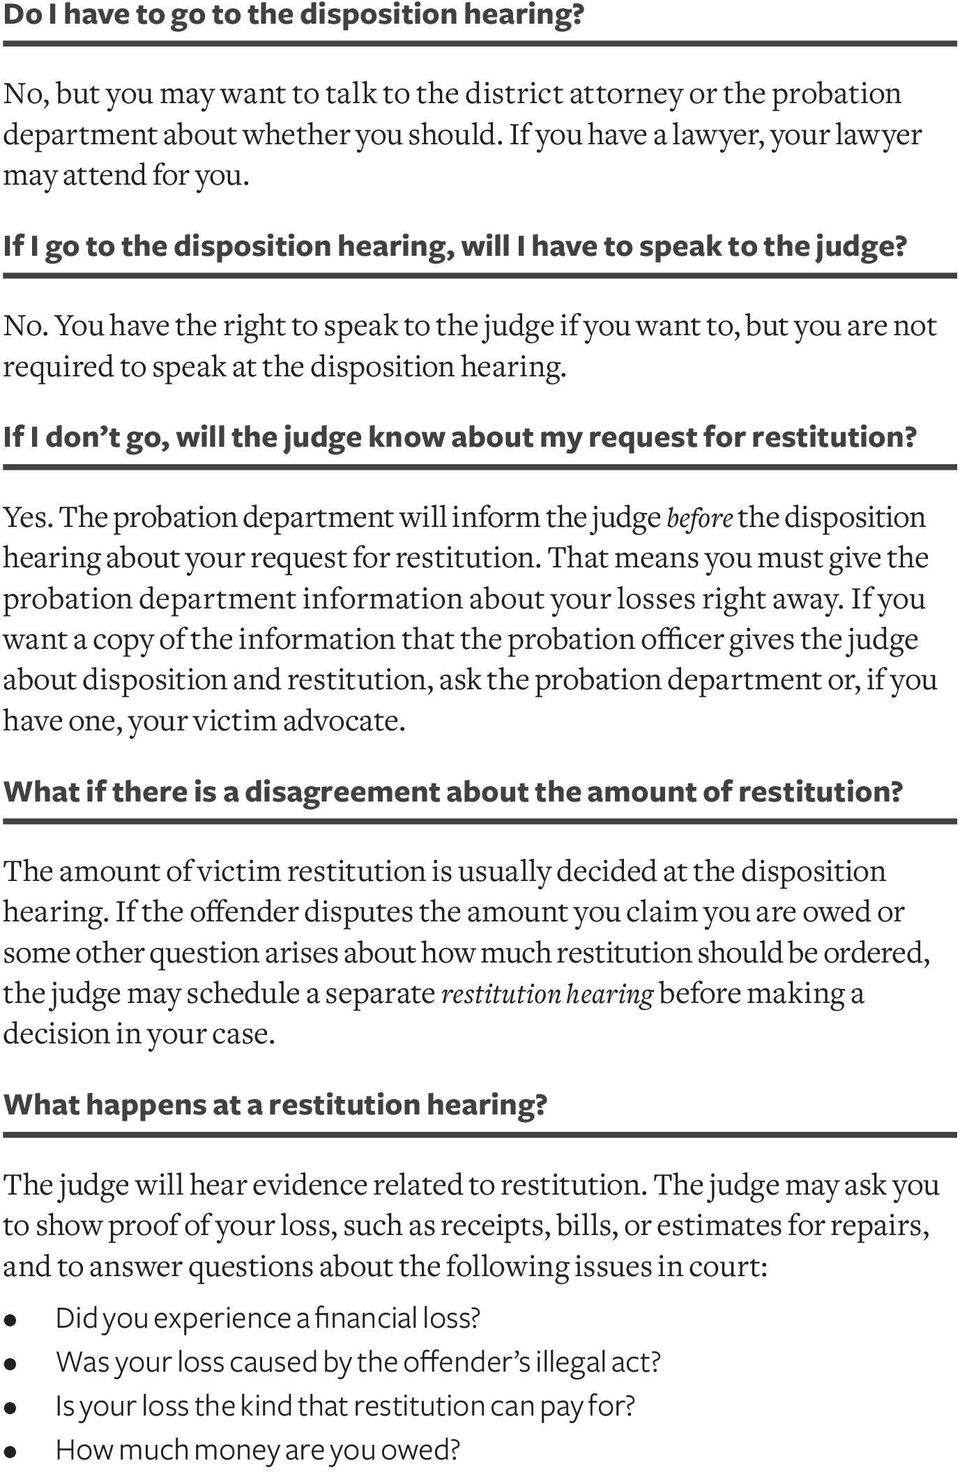 You have the right to speak to the judge if you want to, but you are not required to speak at the disposition hearing. If I don t go, will the judge know about my request for restitution? Yes.